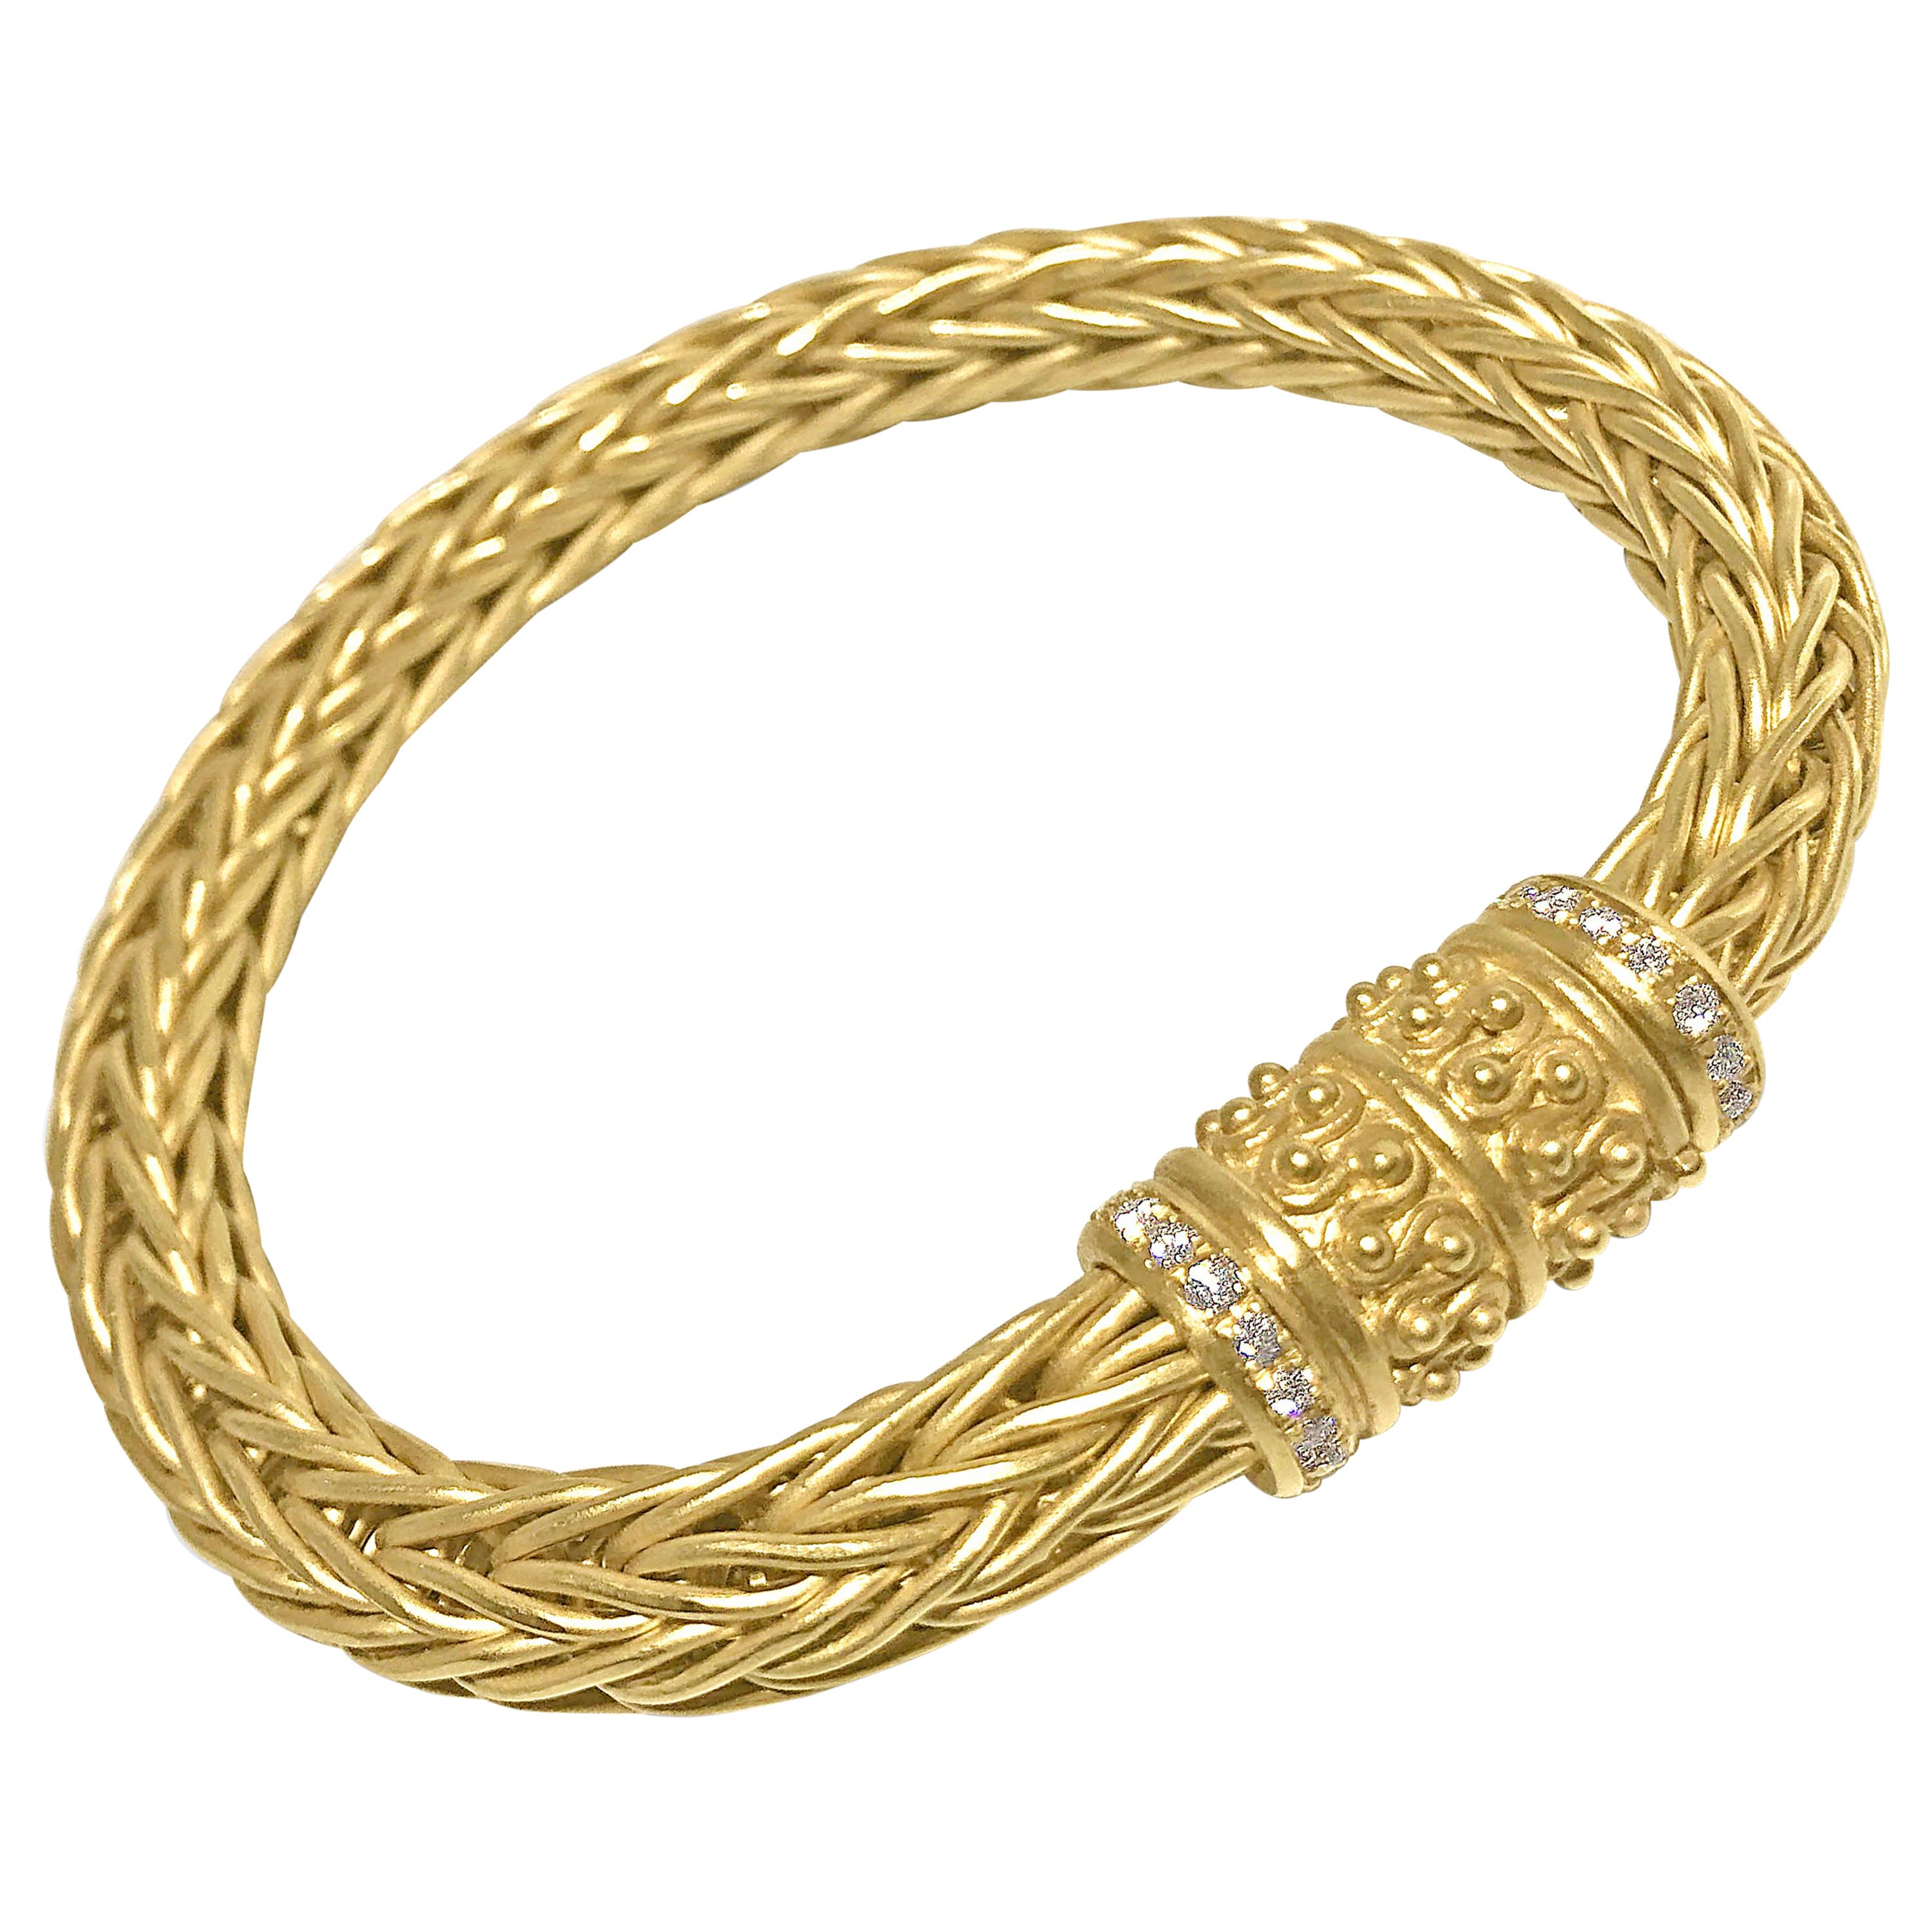 Matthia's & Claire Etrusca 18k Gold Braided Woven Bracelet with Diamonds For Sale